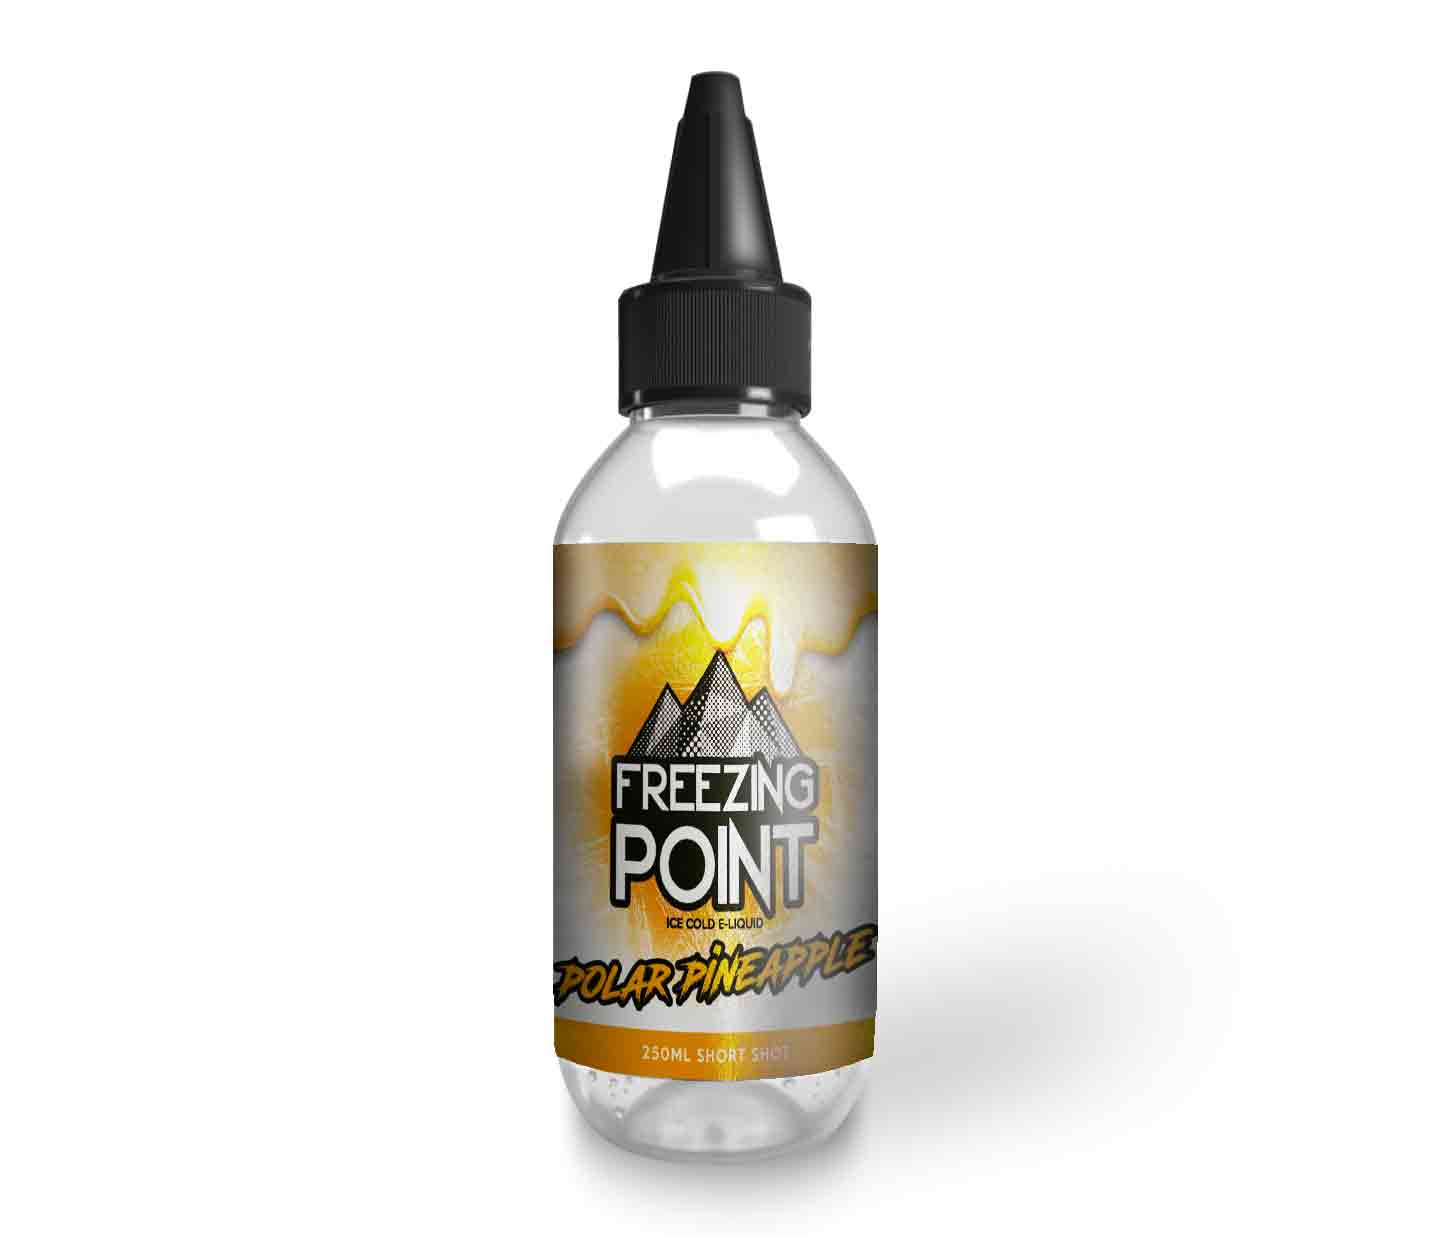 Polar Pineapple Flavour Shot by Freezing Point - 250ml